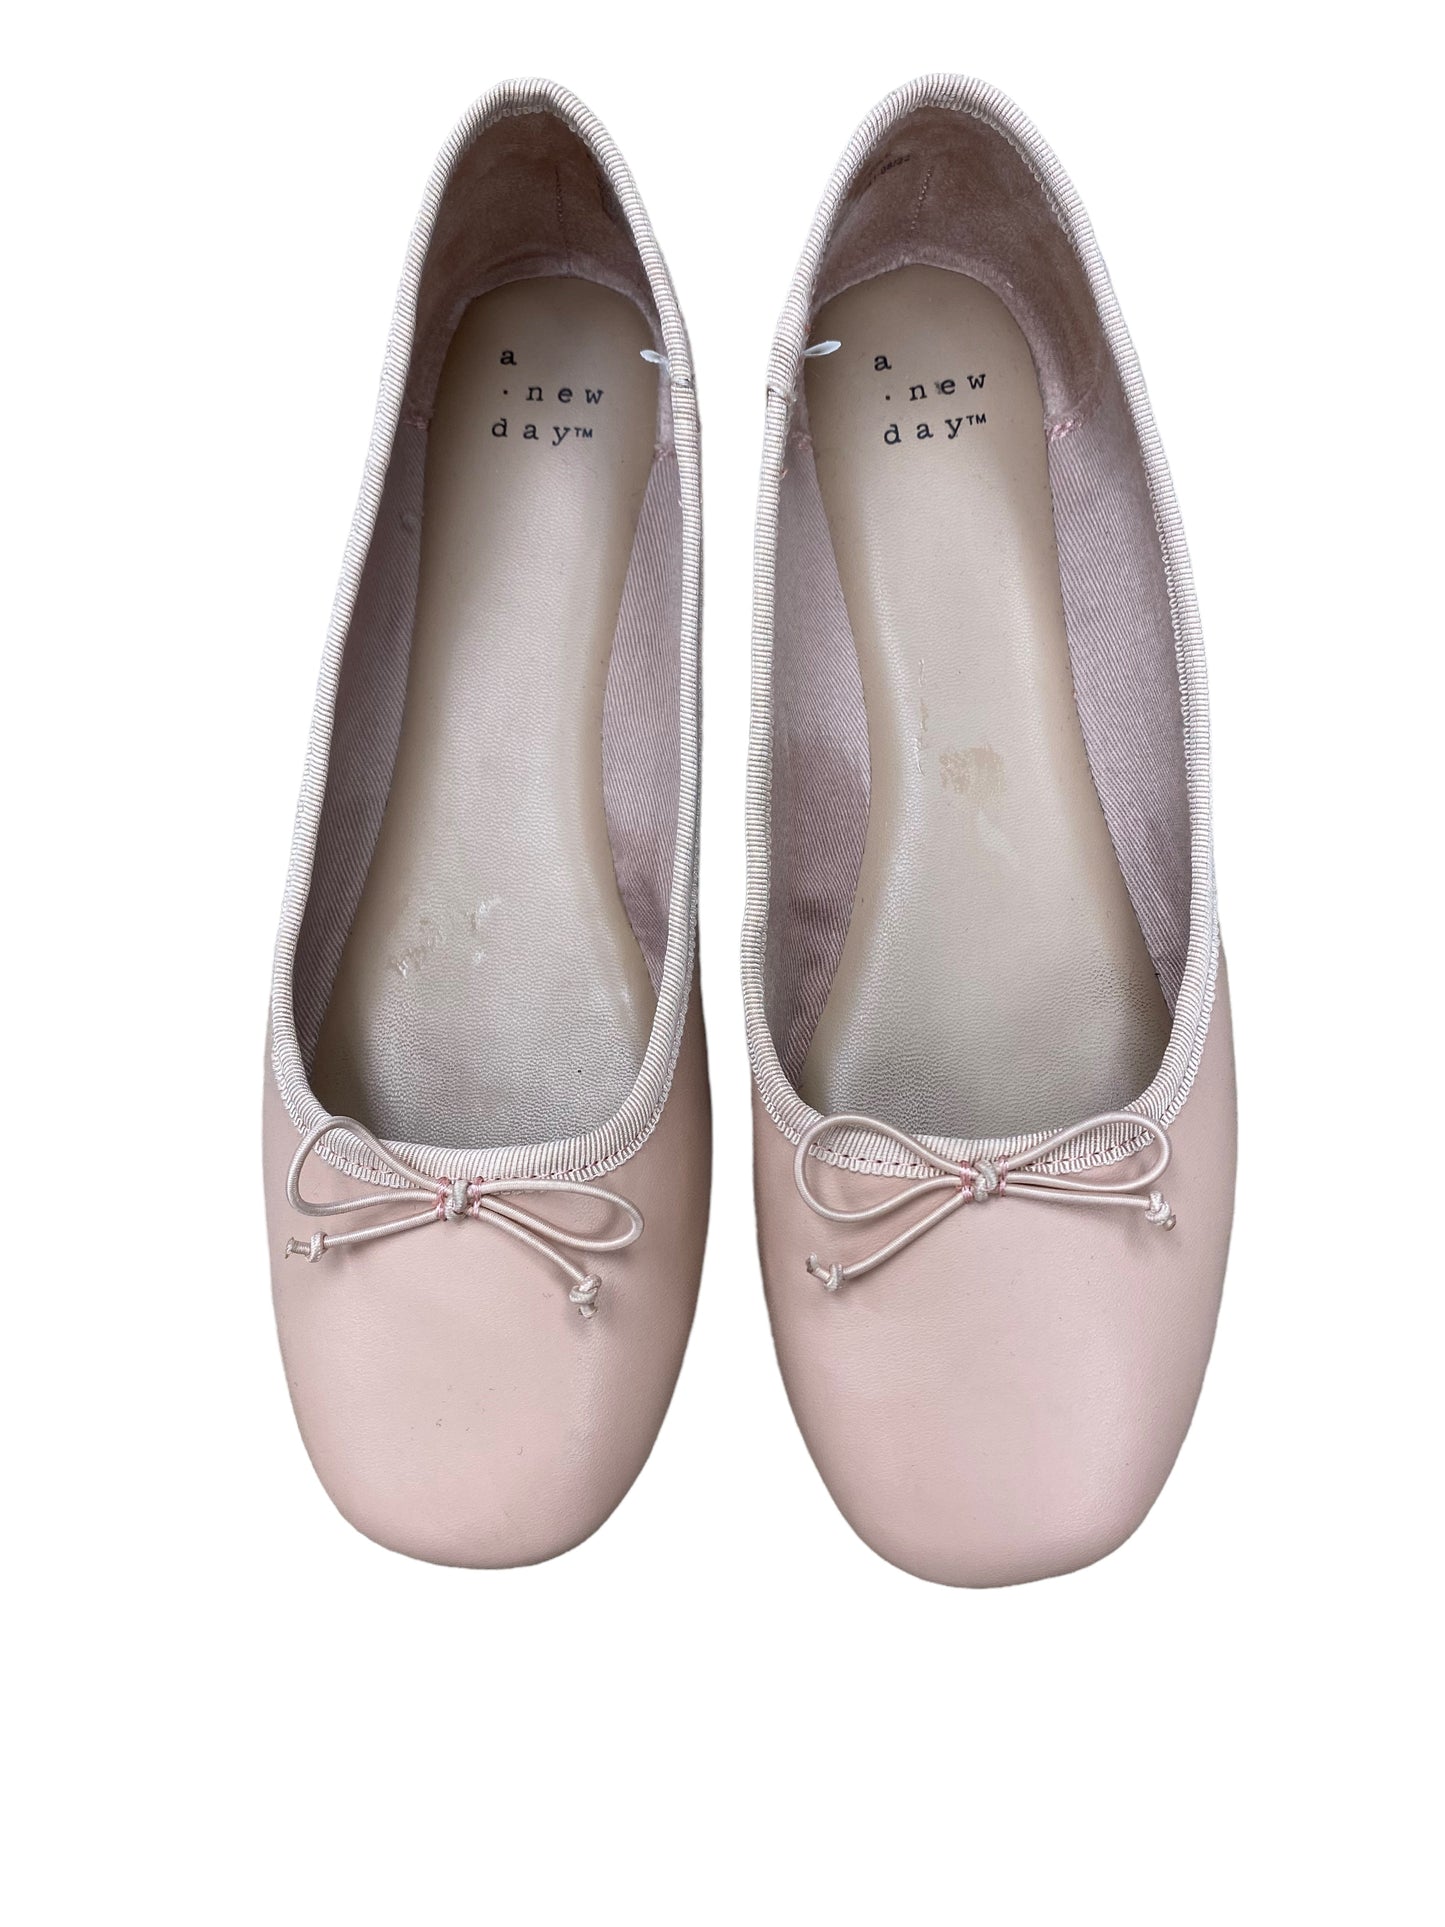 Pink Shoes Flats A New Day, Size 6.5